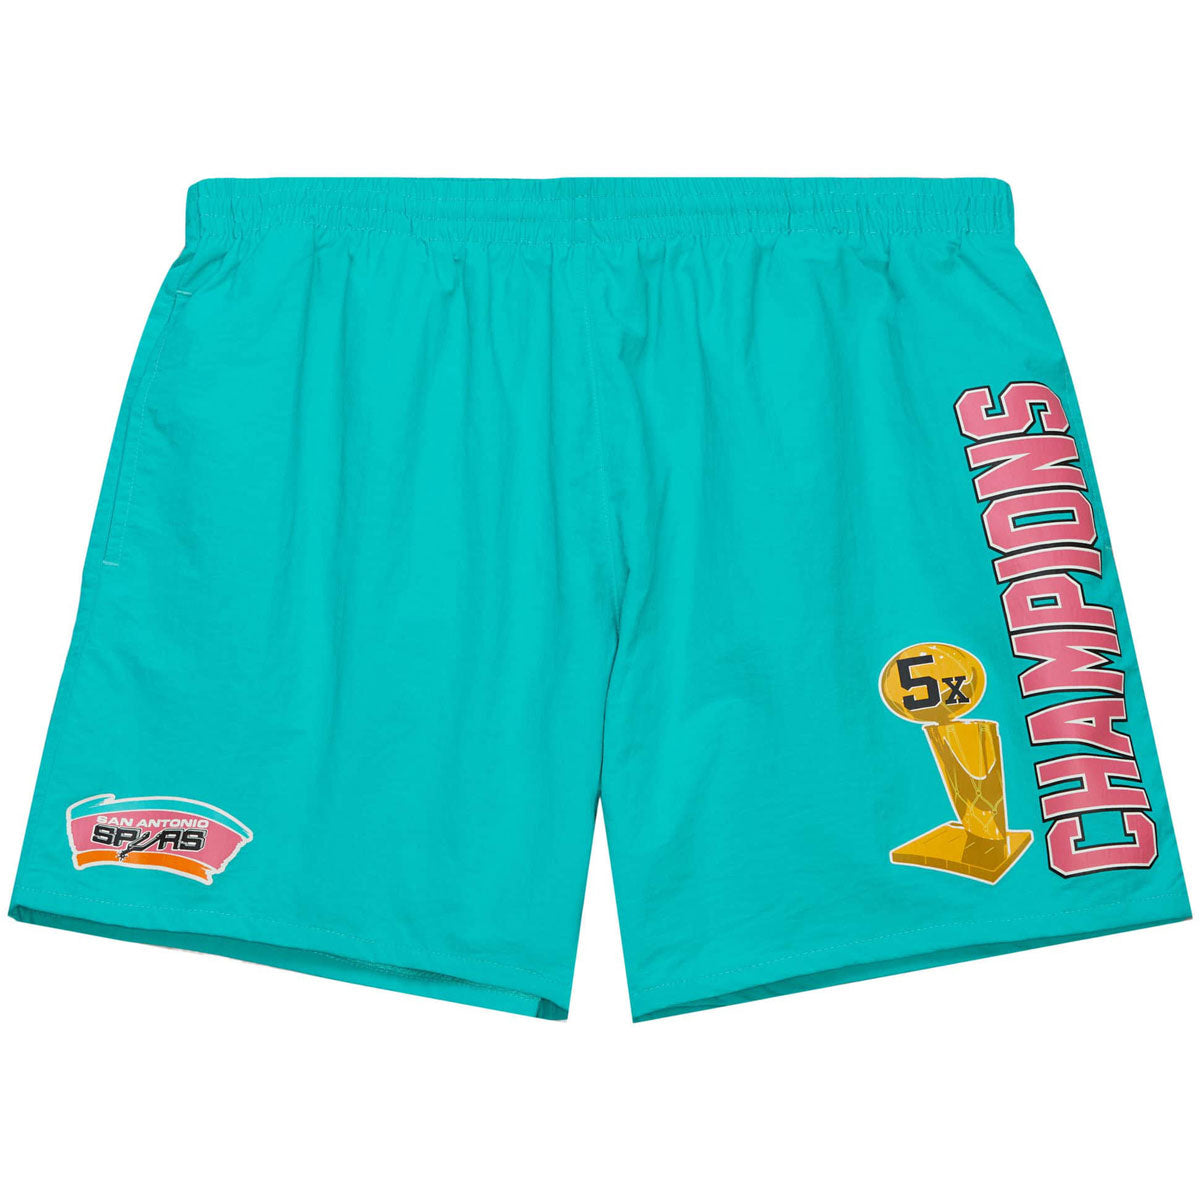 Mitchell & Ness Heritage Woven Spurs Shorts Large / Teal